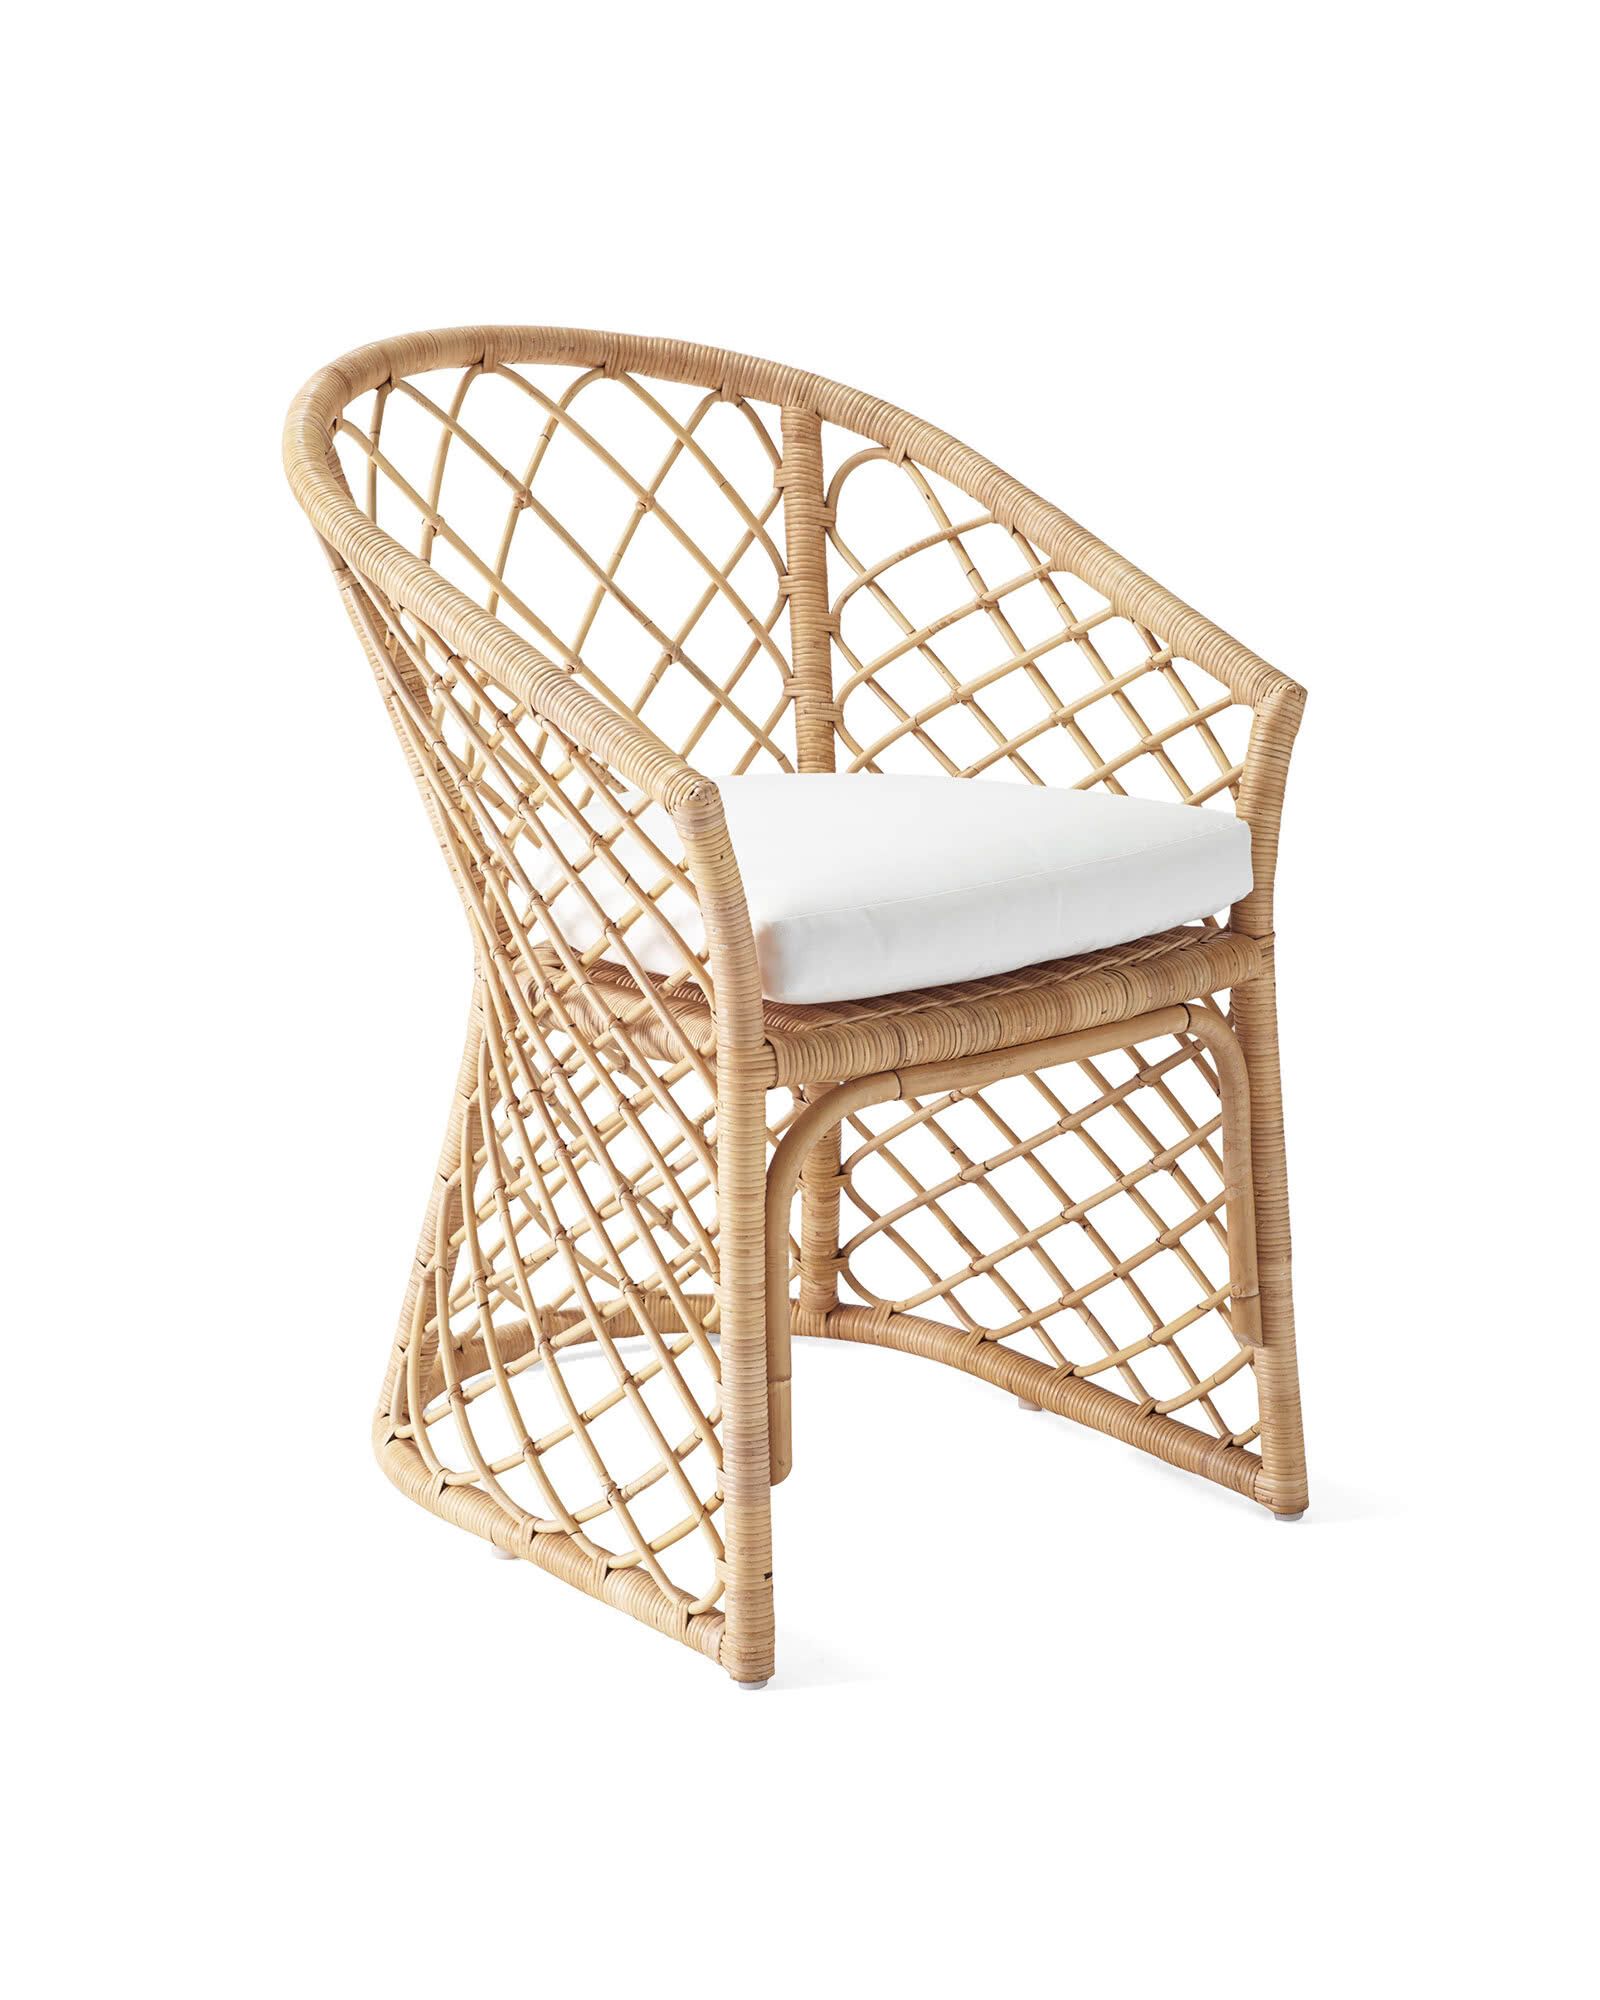 Avalon Rattan Dining Chair - Natural | Serena and Lily